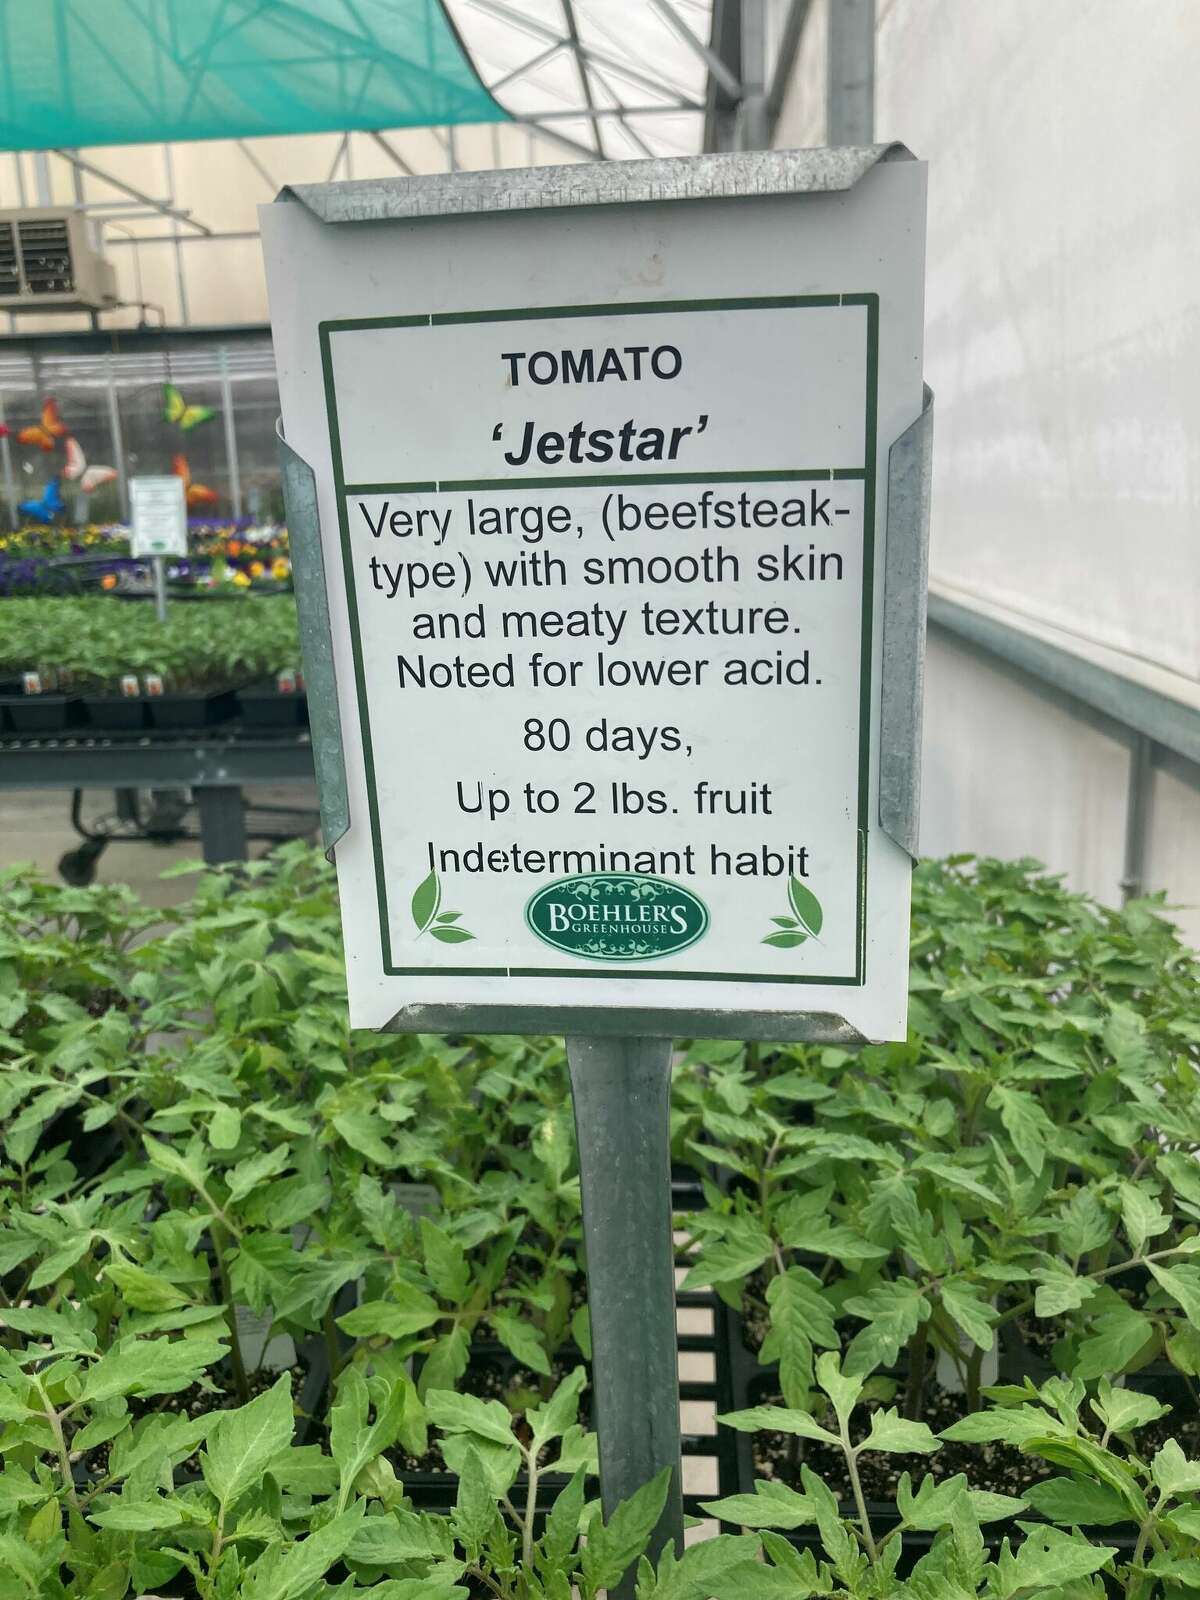 Boehler’s Greenhouse, 5080 Swan Creed Rd., Saginaw, provides valuable growing information for its many varieties of tomatoes.  Look at the differences between these two popular varieties, ‘Mountain Fresh’ and “Jetstar.’